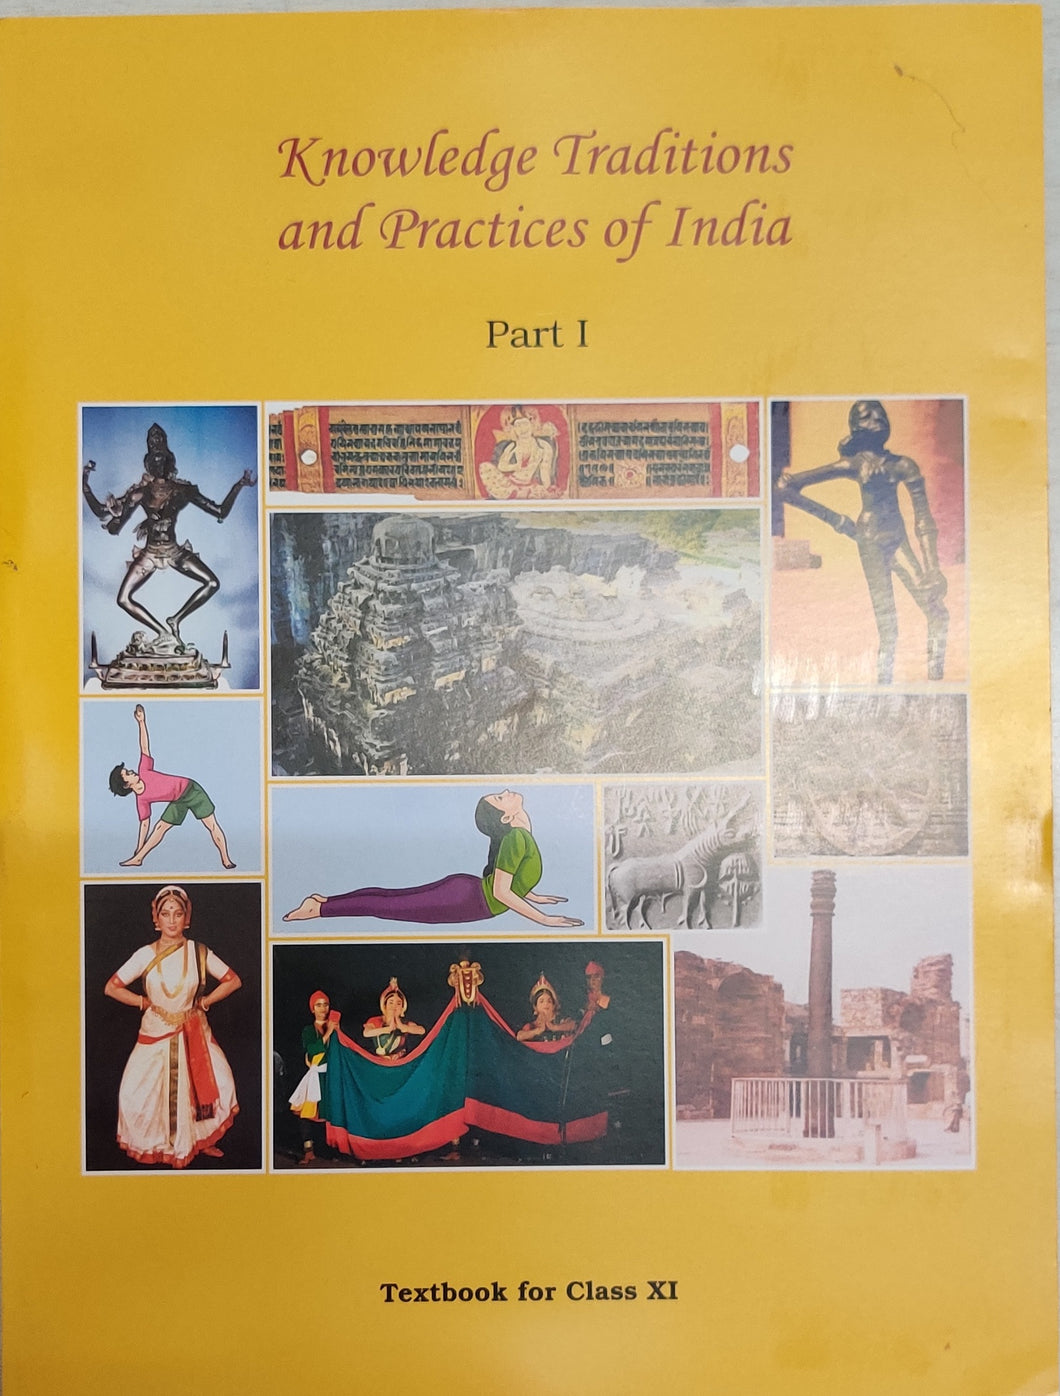 NCERT Knowledge Traditions and Practices of India - Class 11 - latest edition as per NCERT/CBSE